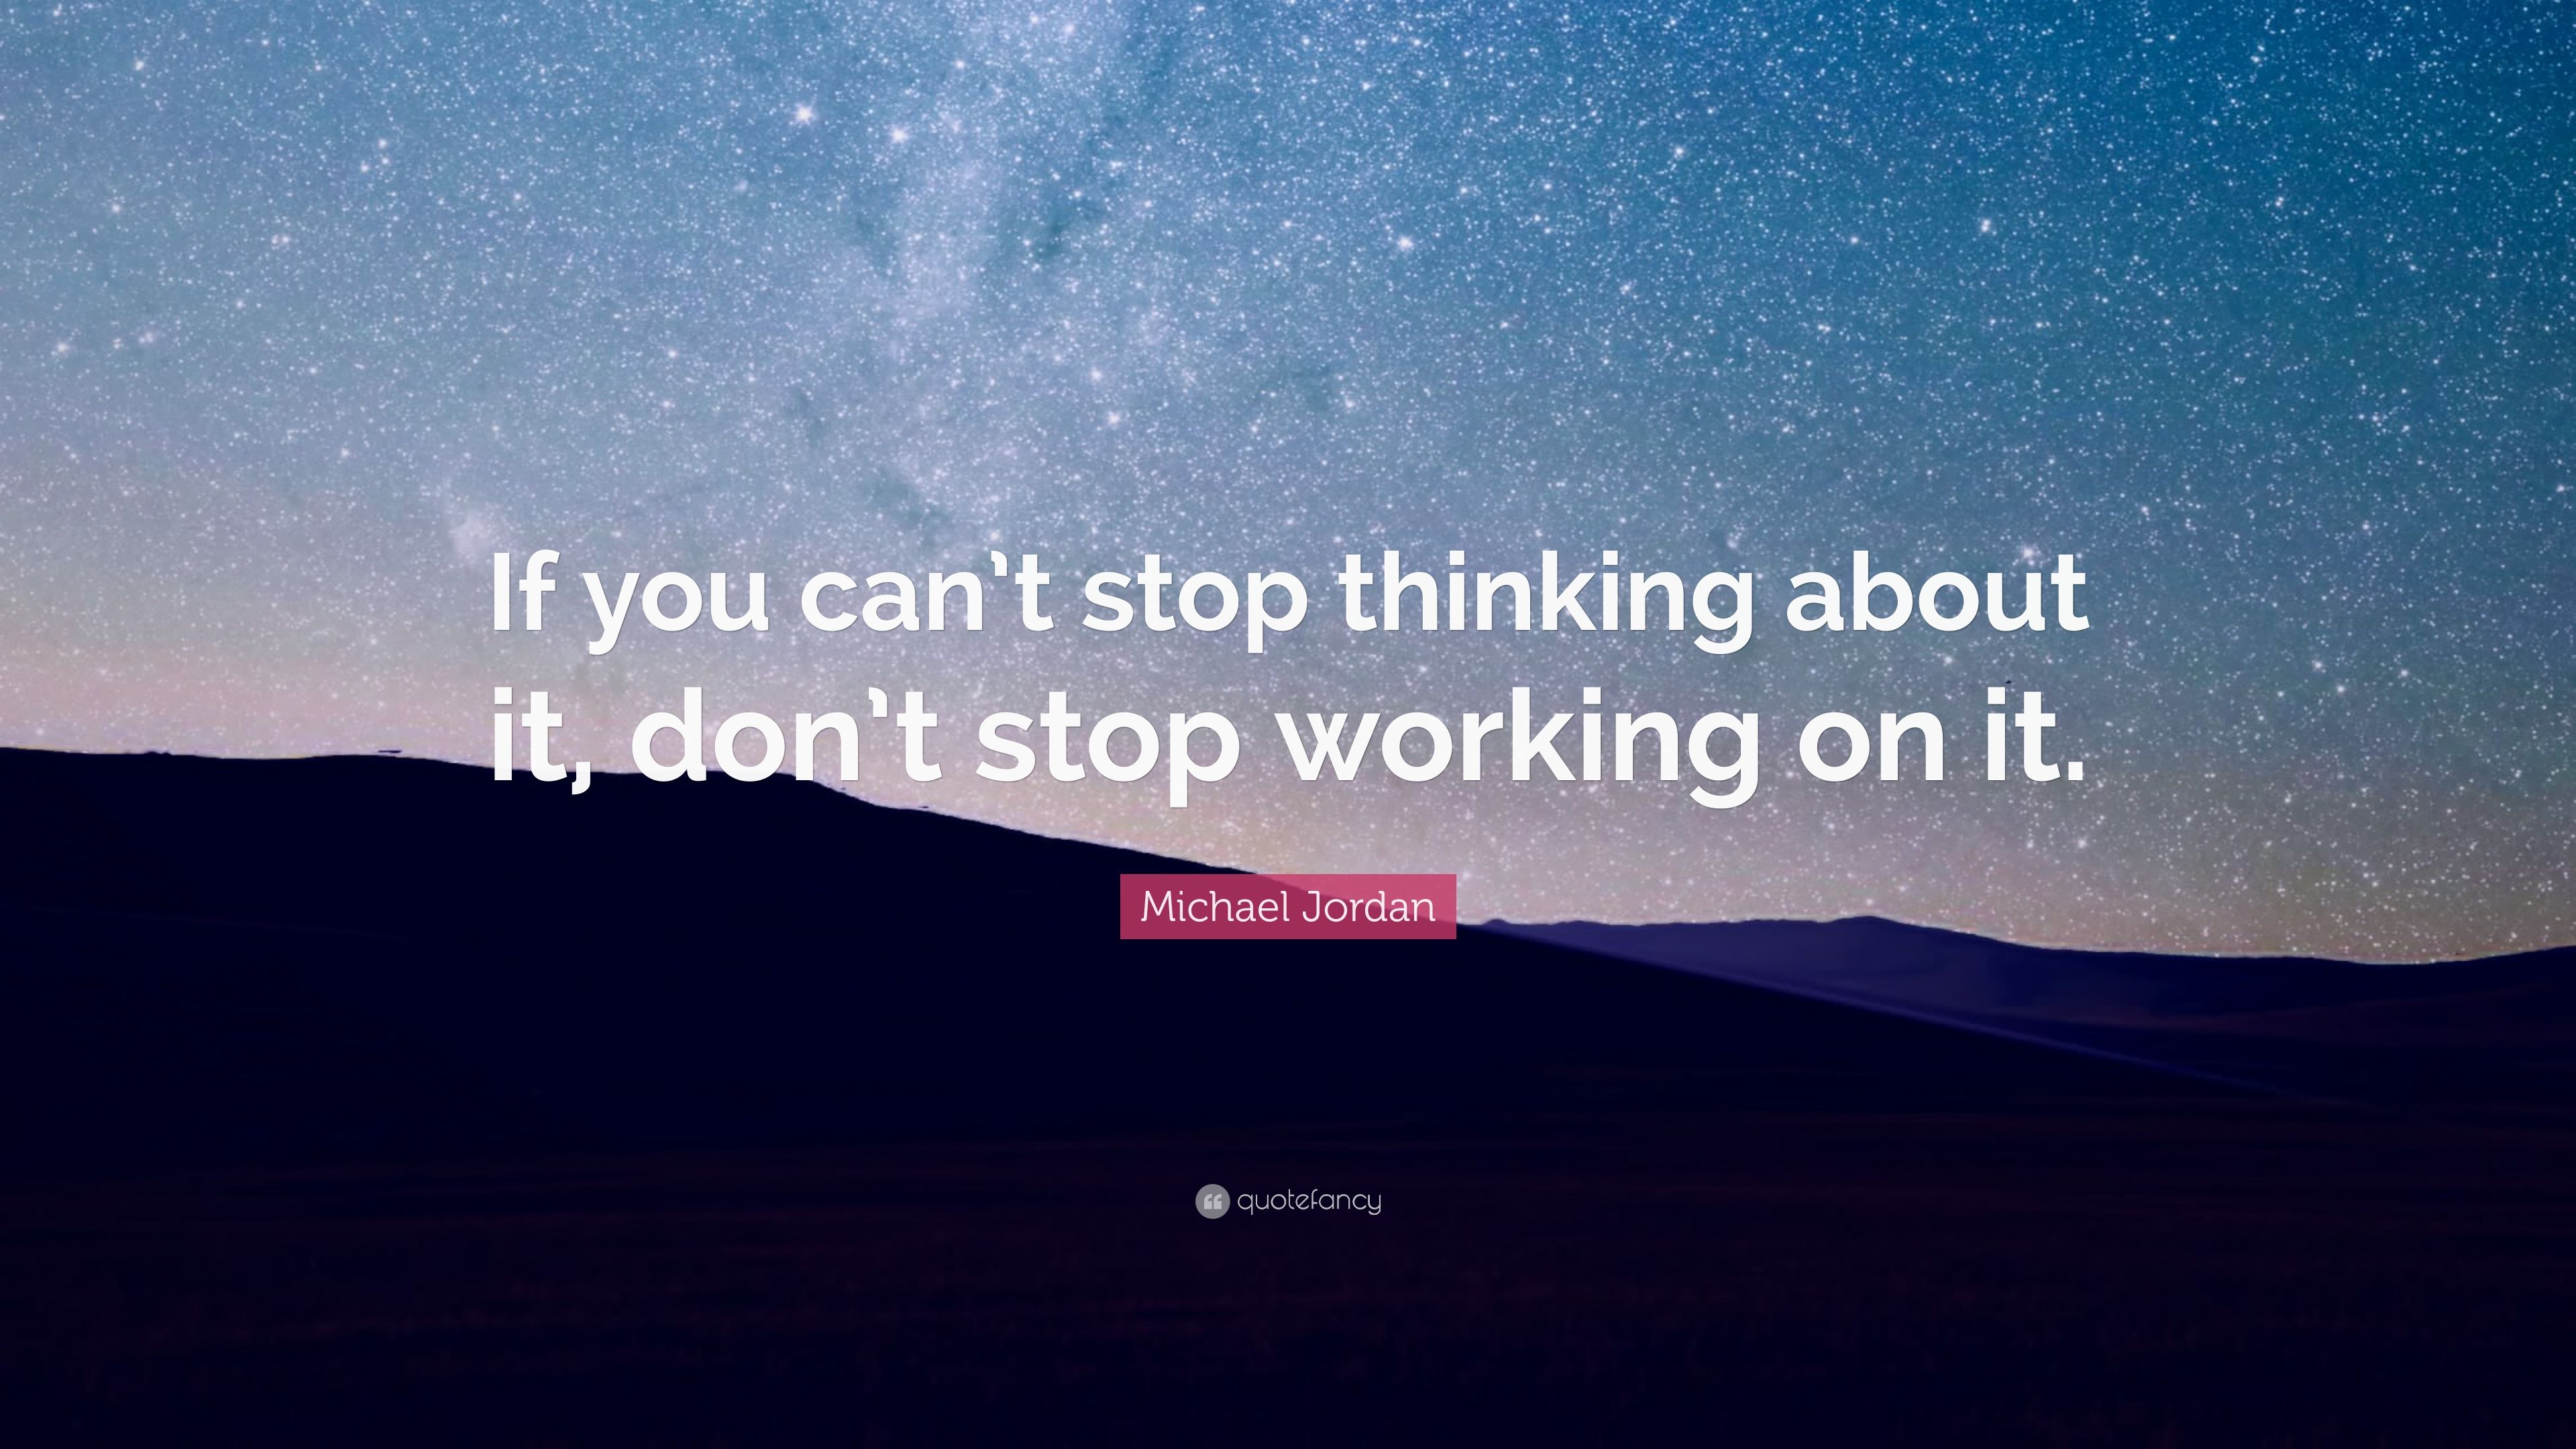 Michael Jordan Quote: “If you can't stop thinking about it, don't stop working on it.” (23 wallpaper)